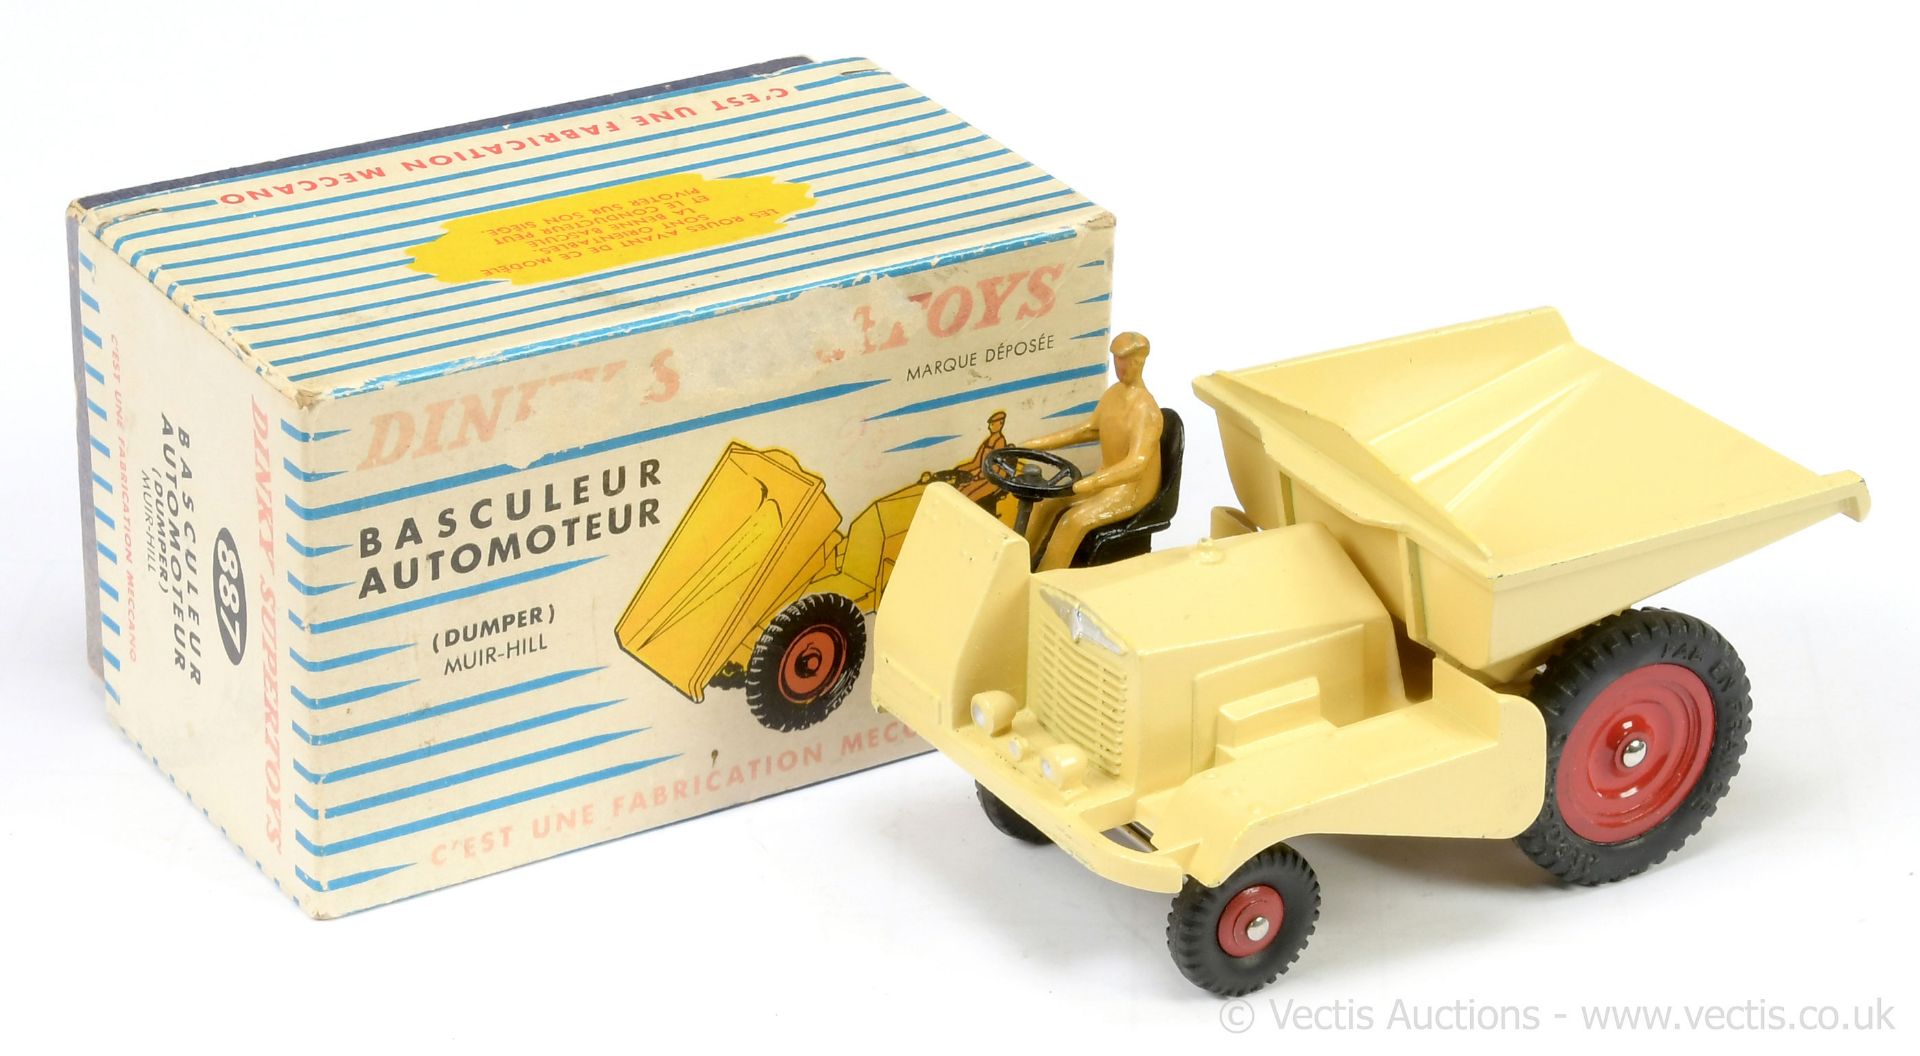 French Dinky 887 Muir Hill Dumper - pale yellow